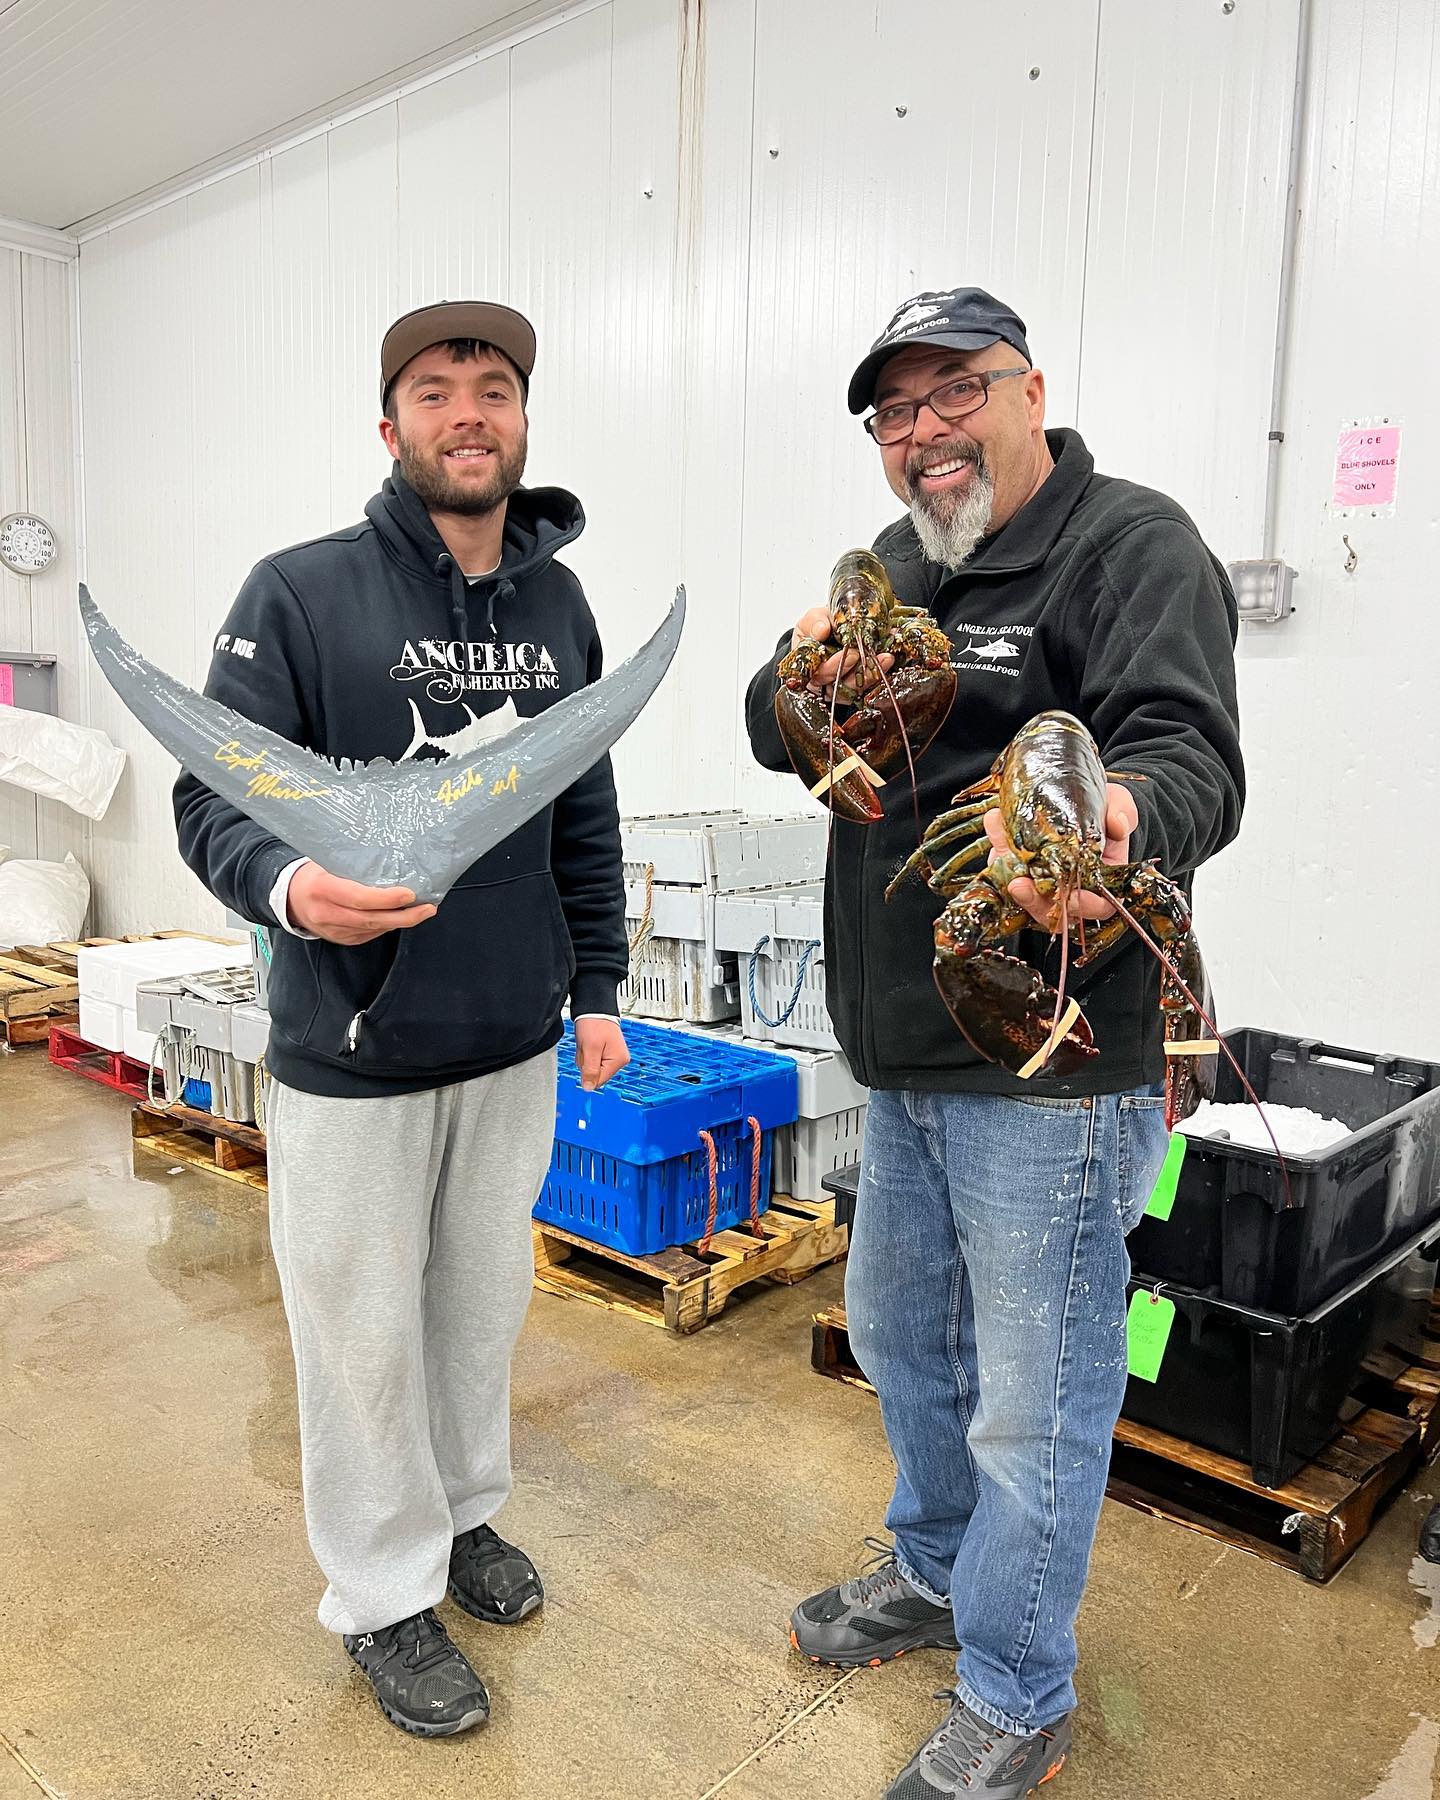 Where can i order fresh seafood online? Angelica Seafoods Premium Fresh Seafood, Sustainably Caught & Shipped From Gloucester's Fishing Families To Yours. Order Fresh Seafood Online Next Day Delivery Nationwide.